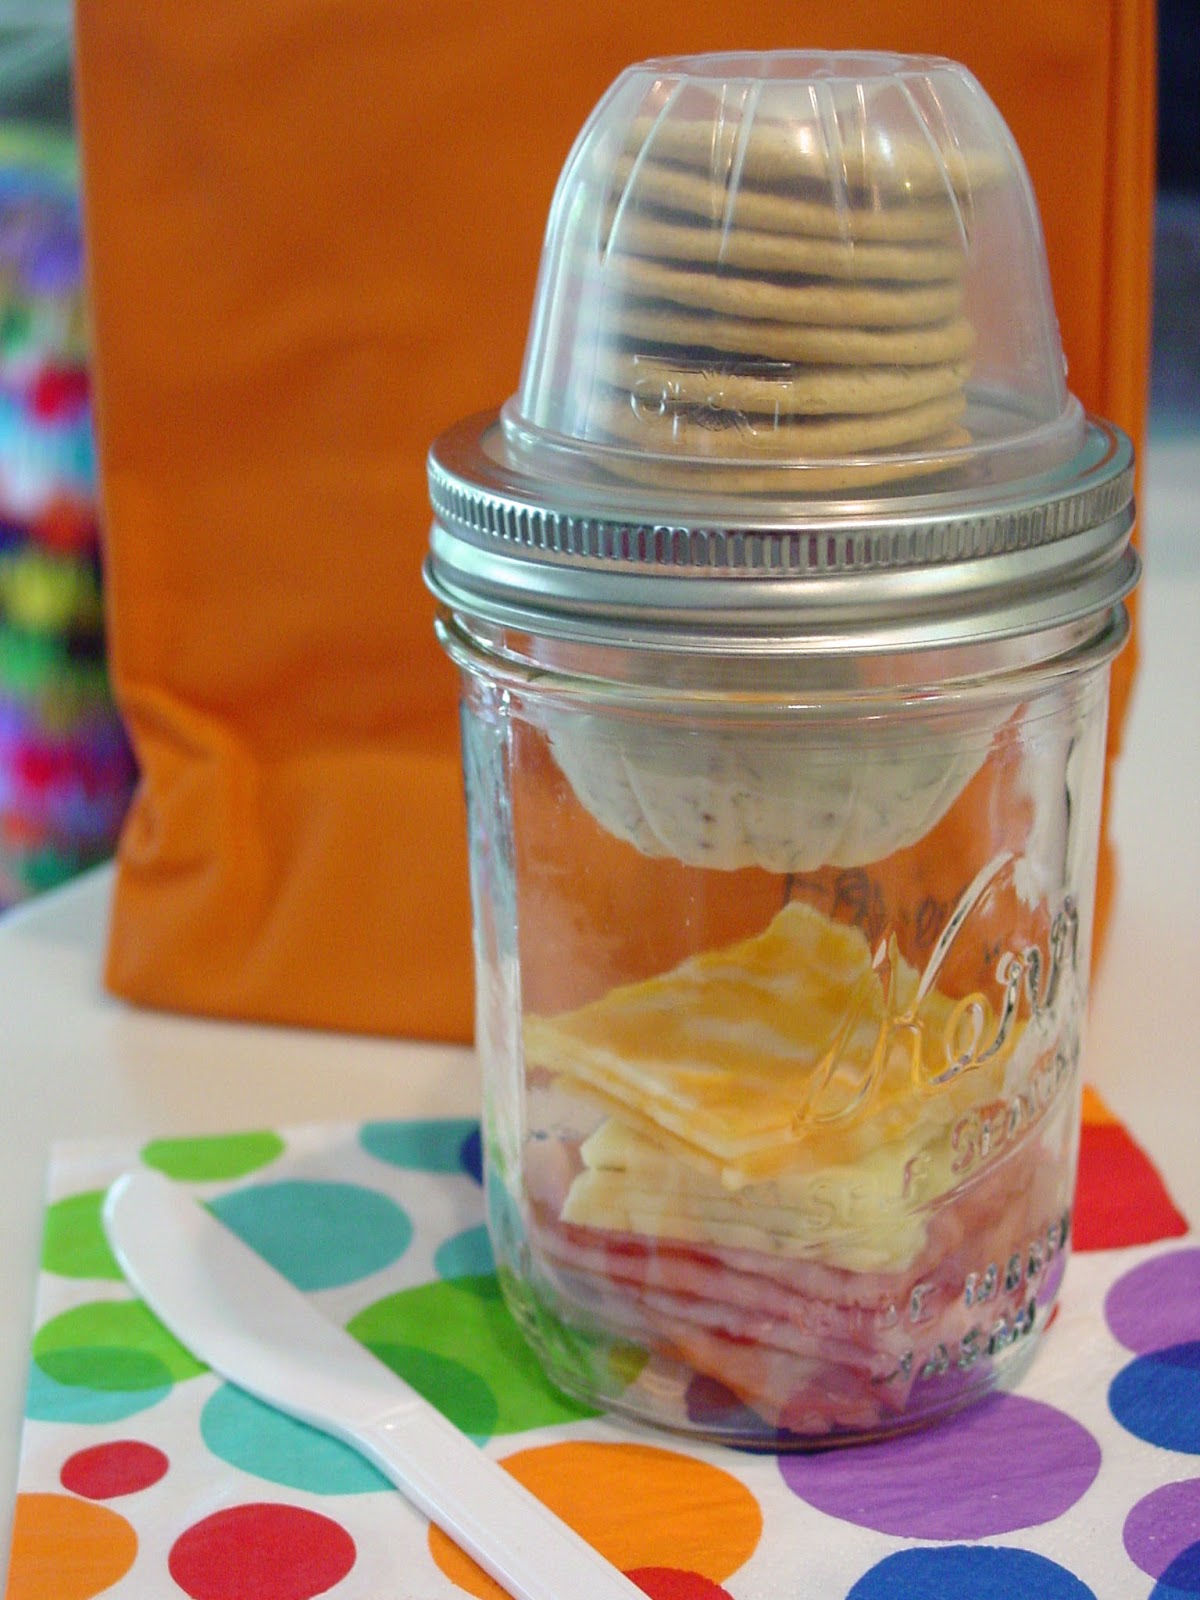 I found my mason jar lid lifter thing! Woohoo! Sorry this is